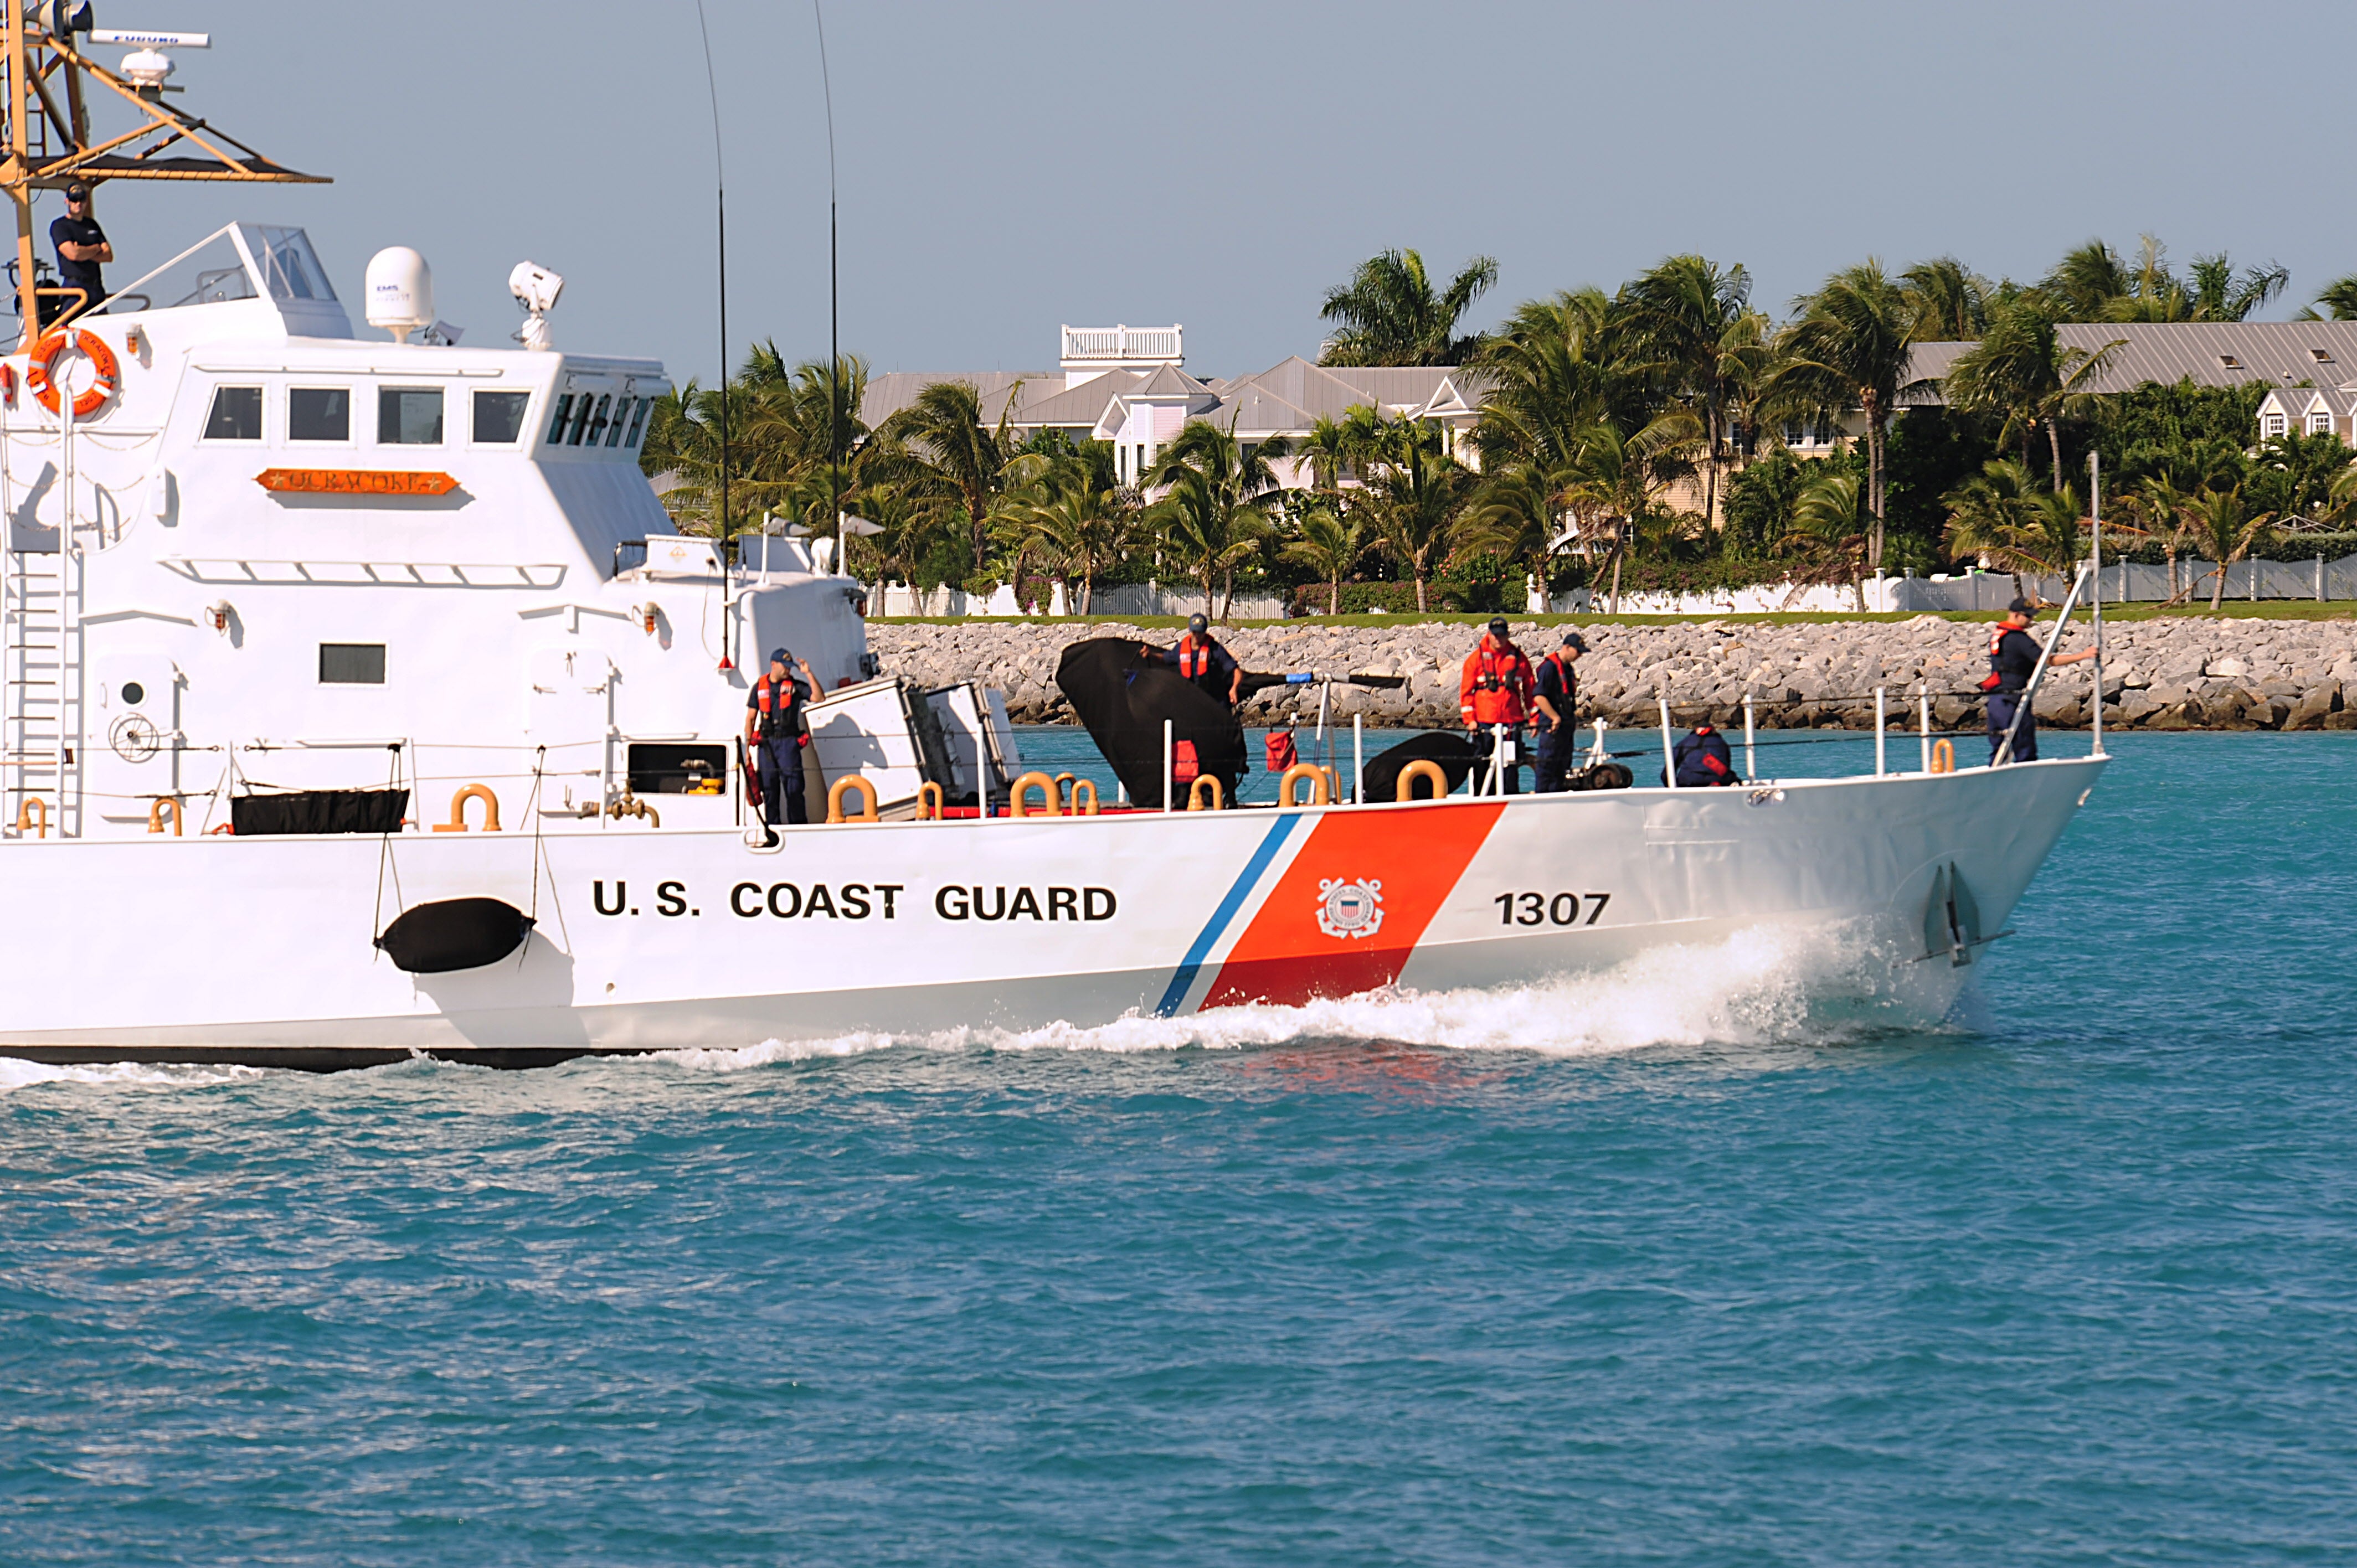 The US Coast Guard is searching for survivors after a boat overturned in Key West, Florida